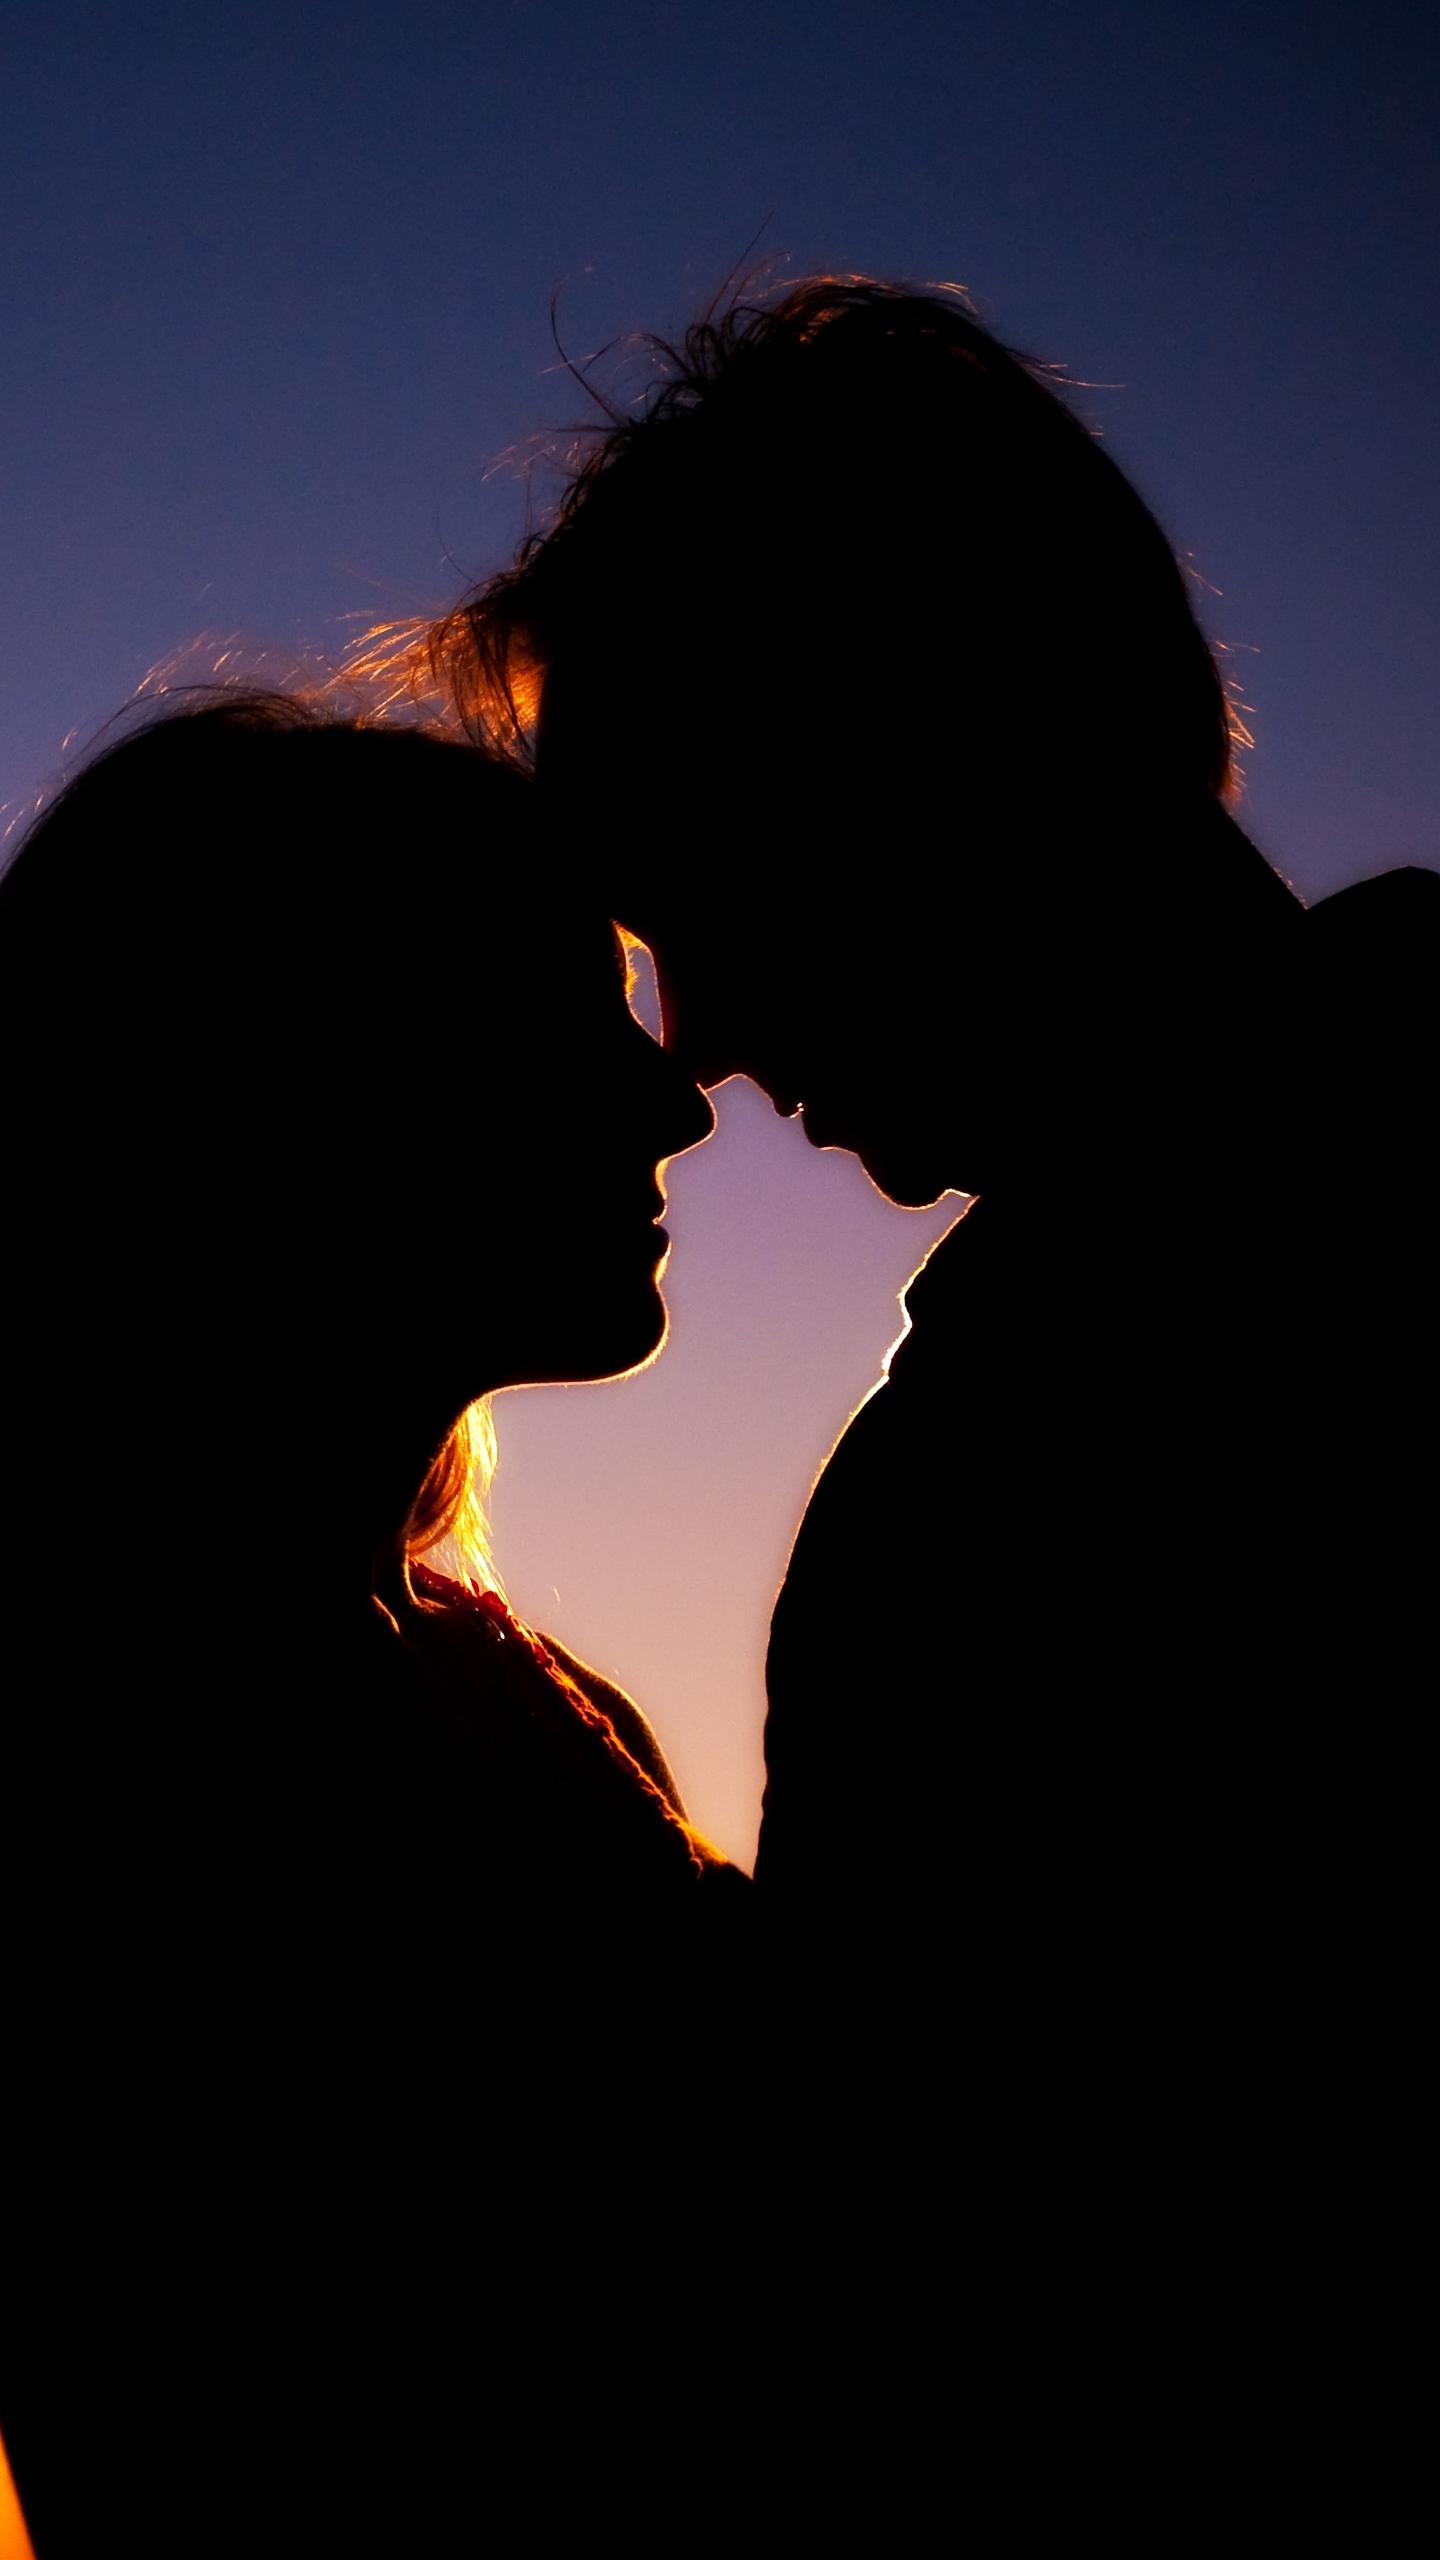 Wallpaper Couple, Silhouettes, Love, Night - Android Lock Screen Love -  1440x2560 Wallpaper 